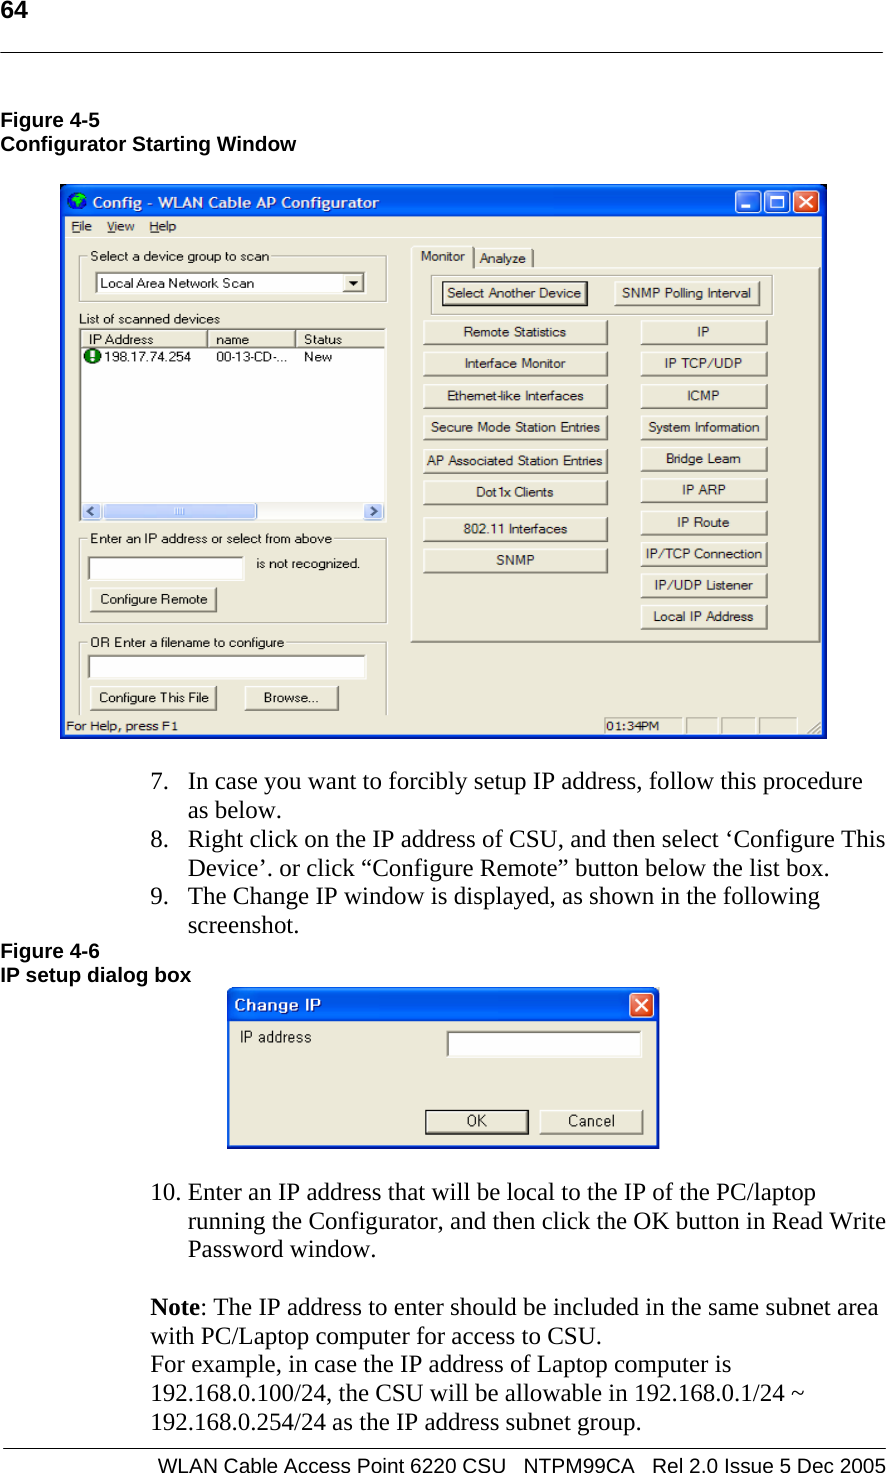   64  WLAN Cable Access Point 6220 CSU   NTPM99CA   Rel 2.0 Issue 5 Dec 2005 Figure 4-5 Configurator Starting Window     7. In case you want to forcibly setup IP address, follow this procedure as below.  8. Right click on the IP address of CSU, and then select ‘Configure This Device’. or click “Configure Remote” button below the list box.  9. The Change IP window is displayed, as shown in the following screenshot. Figure 4-6 IP setup dialog box   10. Enter an IP address that will be local to the IP of the PC/laptop running the Configurator, and then click the OK button in Read Write Password window.    Note: The IP address to enter should be included in the same subnet area with PC/Laptop computer for access to CSU.  For example, in case the IP address of Laptop computer is 192.168.0.100/24, the CSU will be allowable in 192.168.0.1/24 ~ 192.168.0.254/24 as the IP address subnet group. 